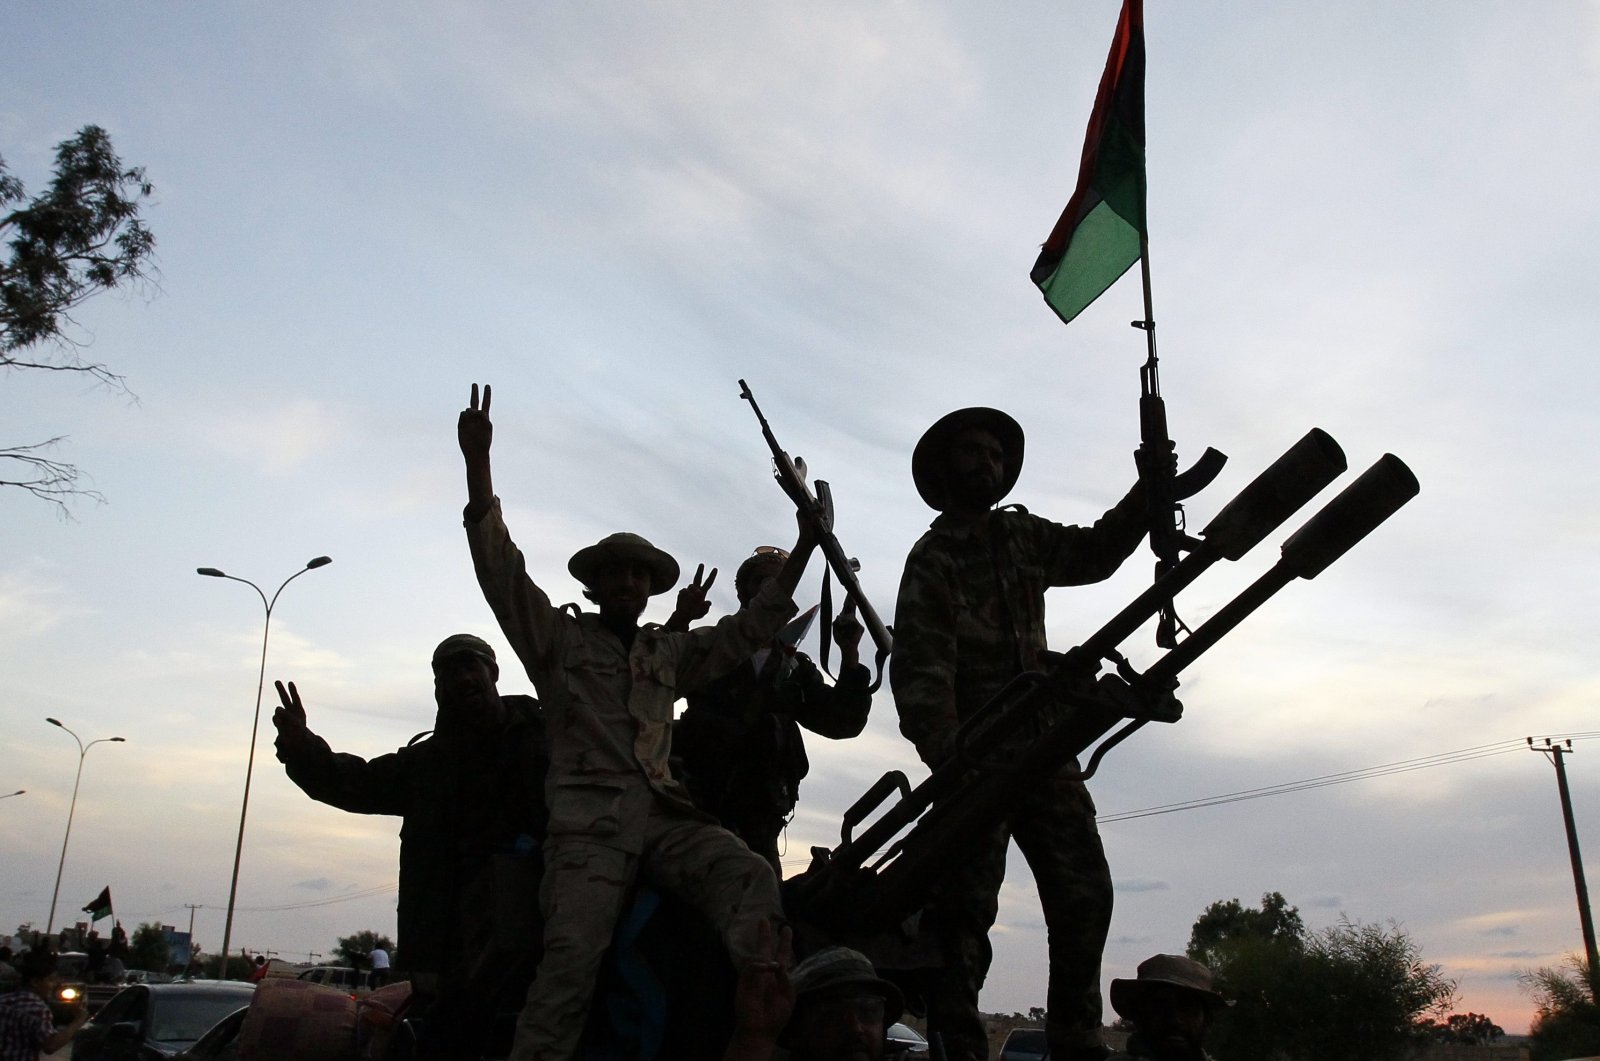 Libyan revolutionary fighters returning from Sirte are welcomed at Al Guwarsha gate in Benghazi, Libya, Oct. 22, 2011. (AP Photo)